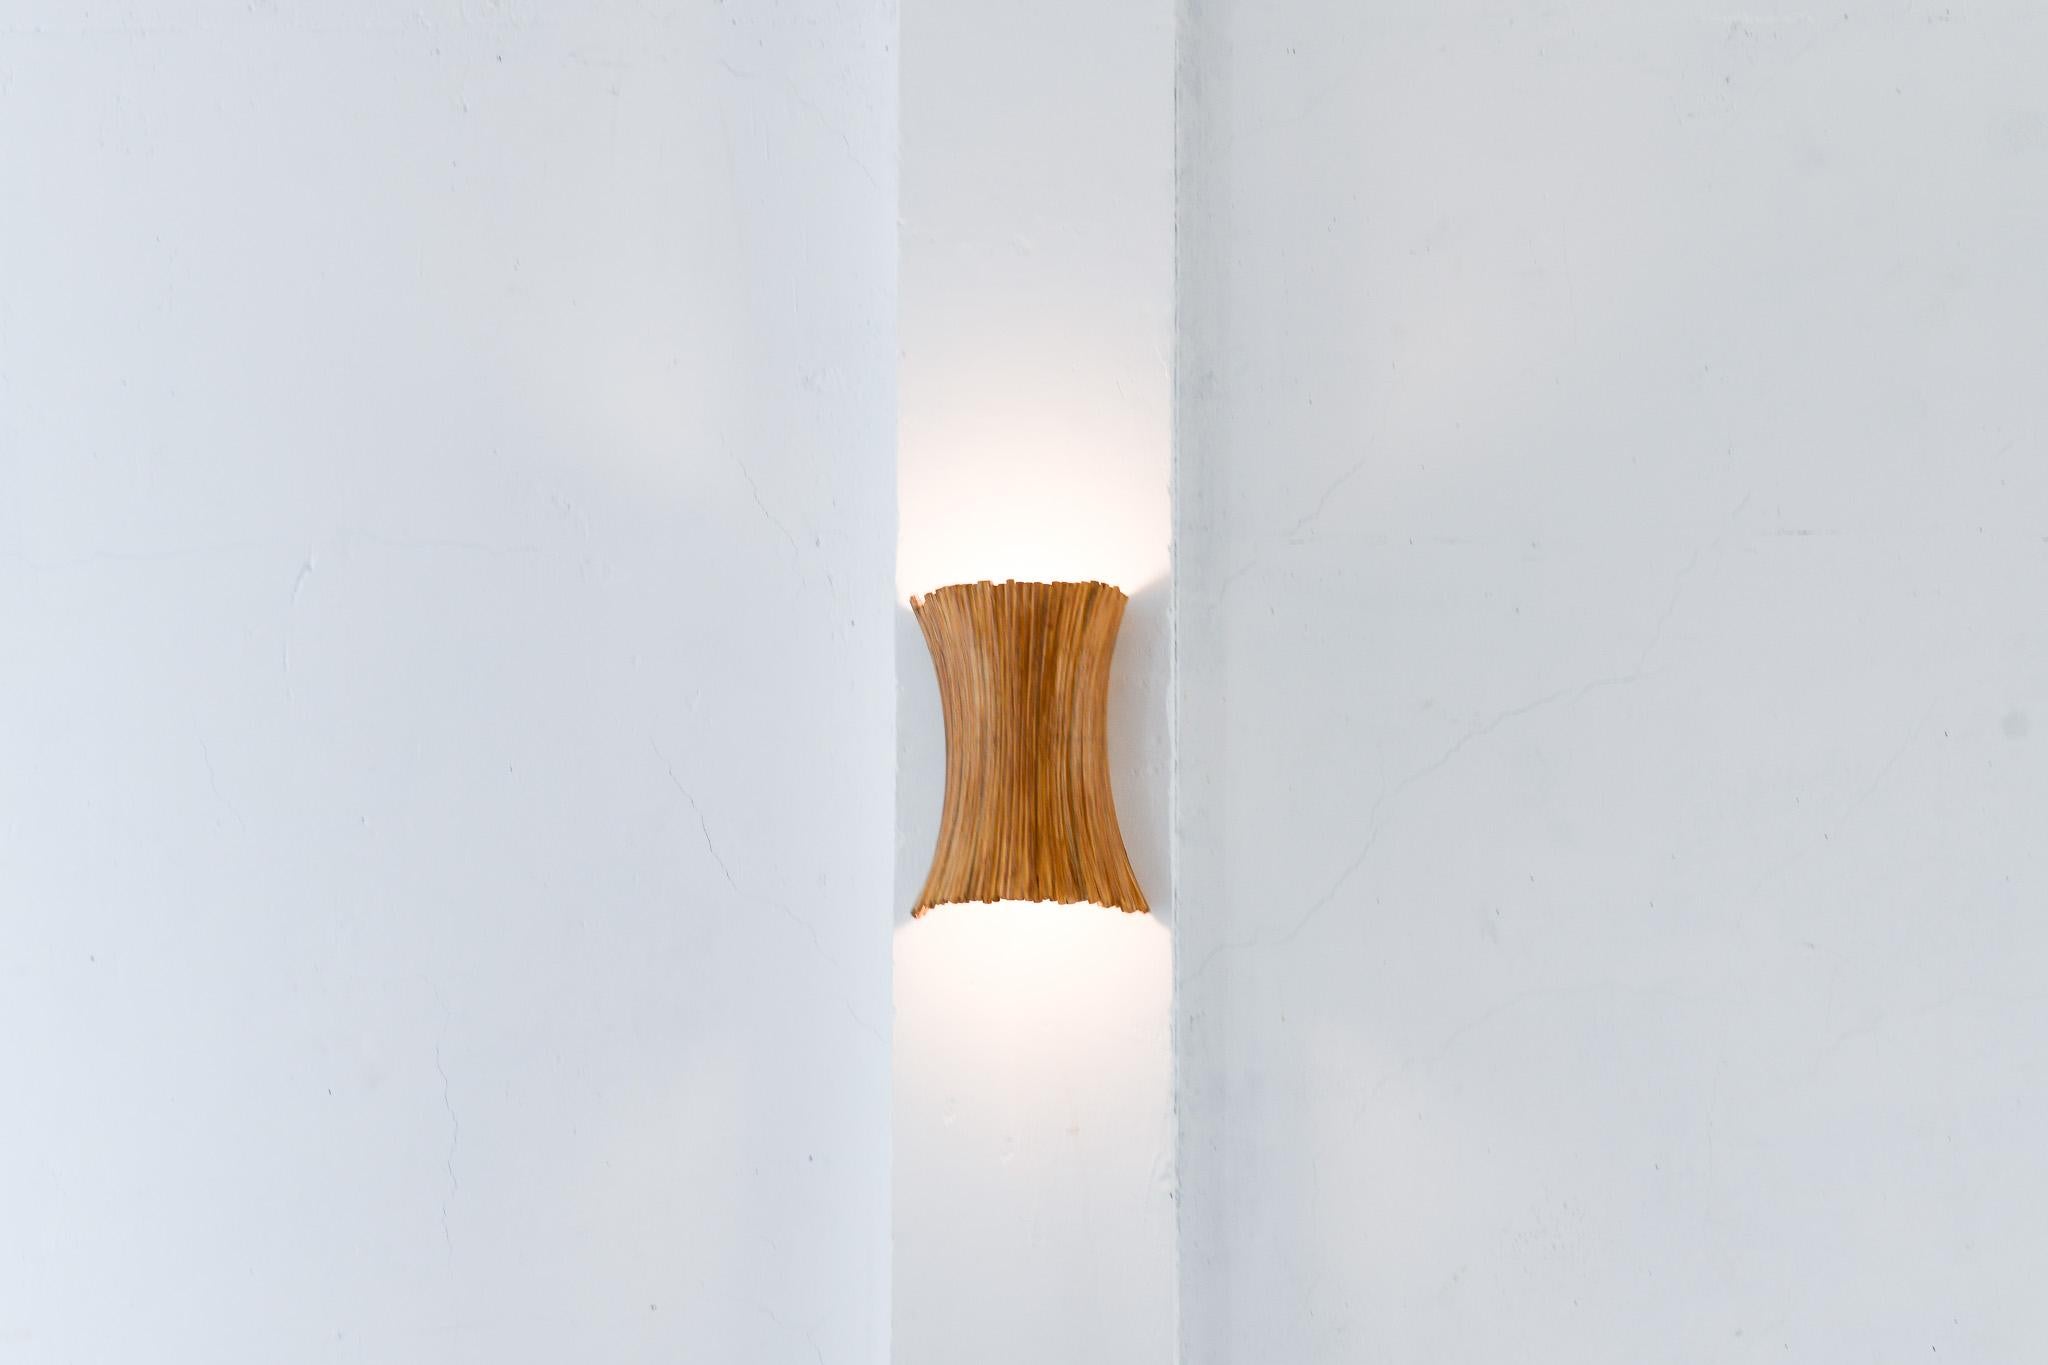 Introducing the one-of-a-kind sculptural rattan wall sconce, handcrafted with care to achieve beautiful curves yet organic finish. Made from natural pencil reed rattan, this sconce adds a unique and natural touch to any space. Expertly crafted for a